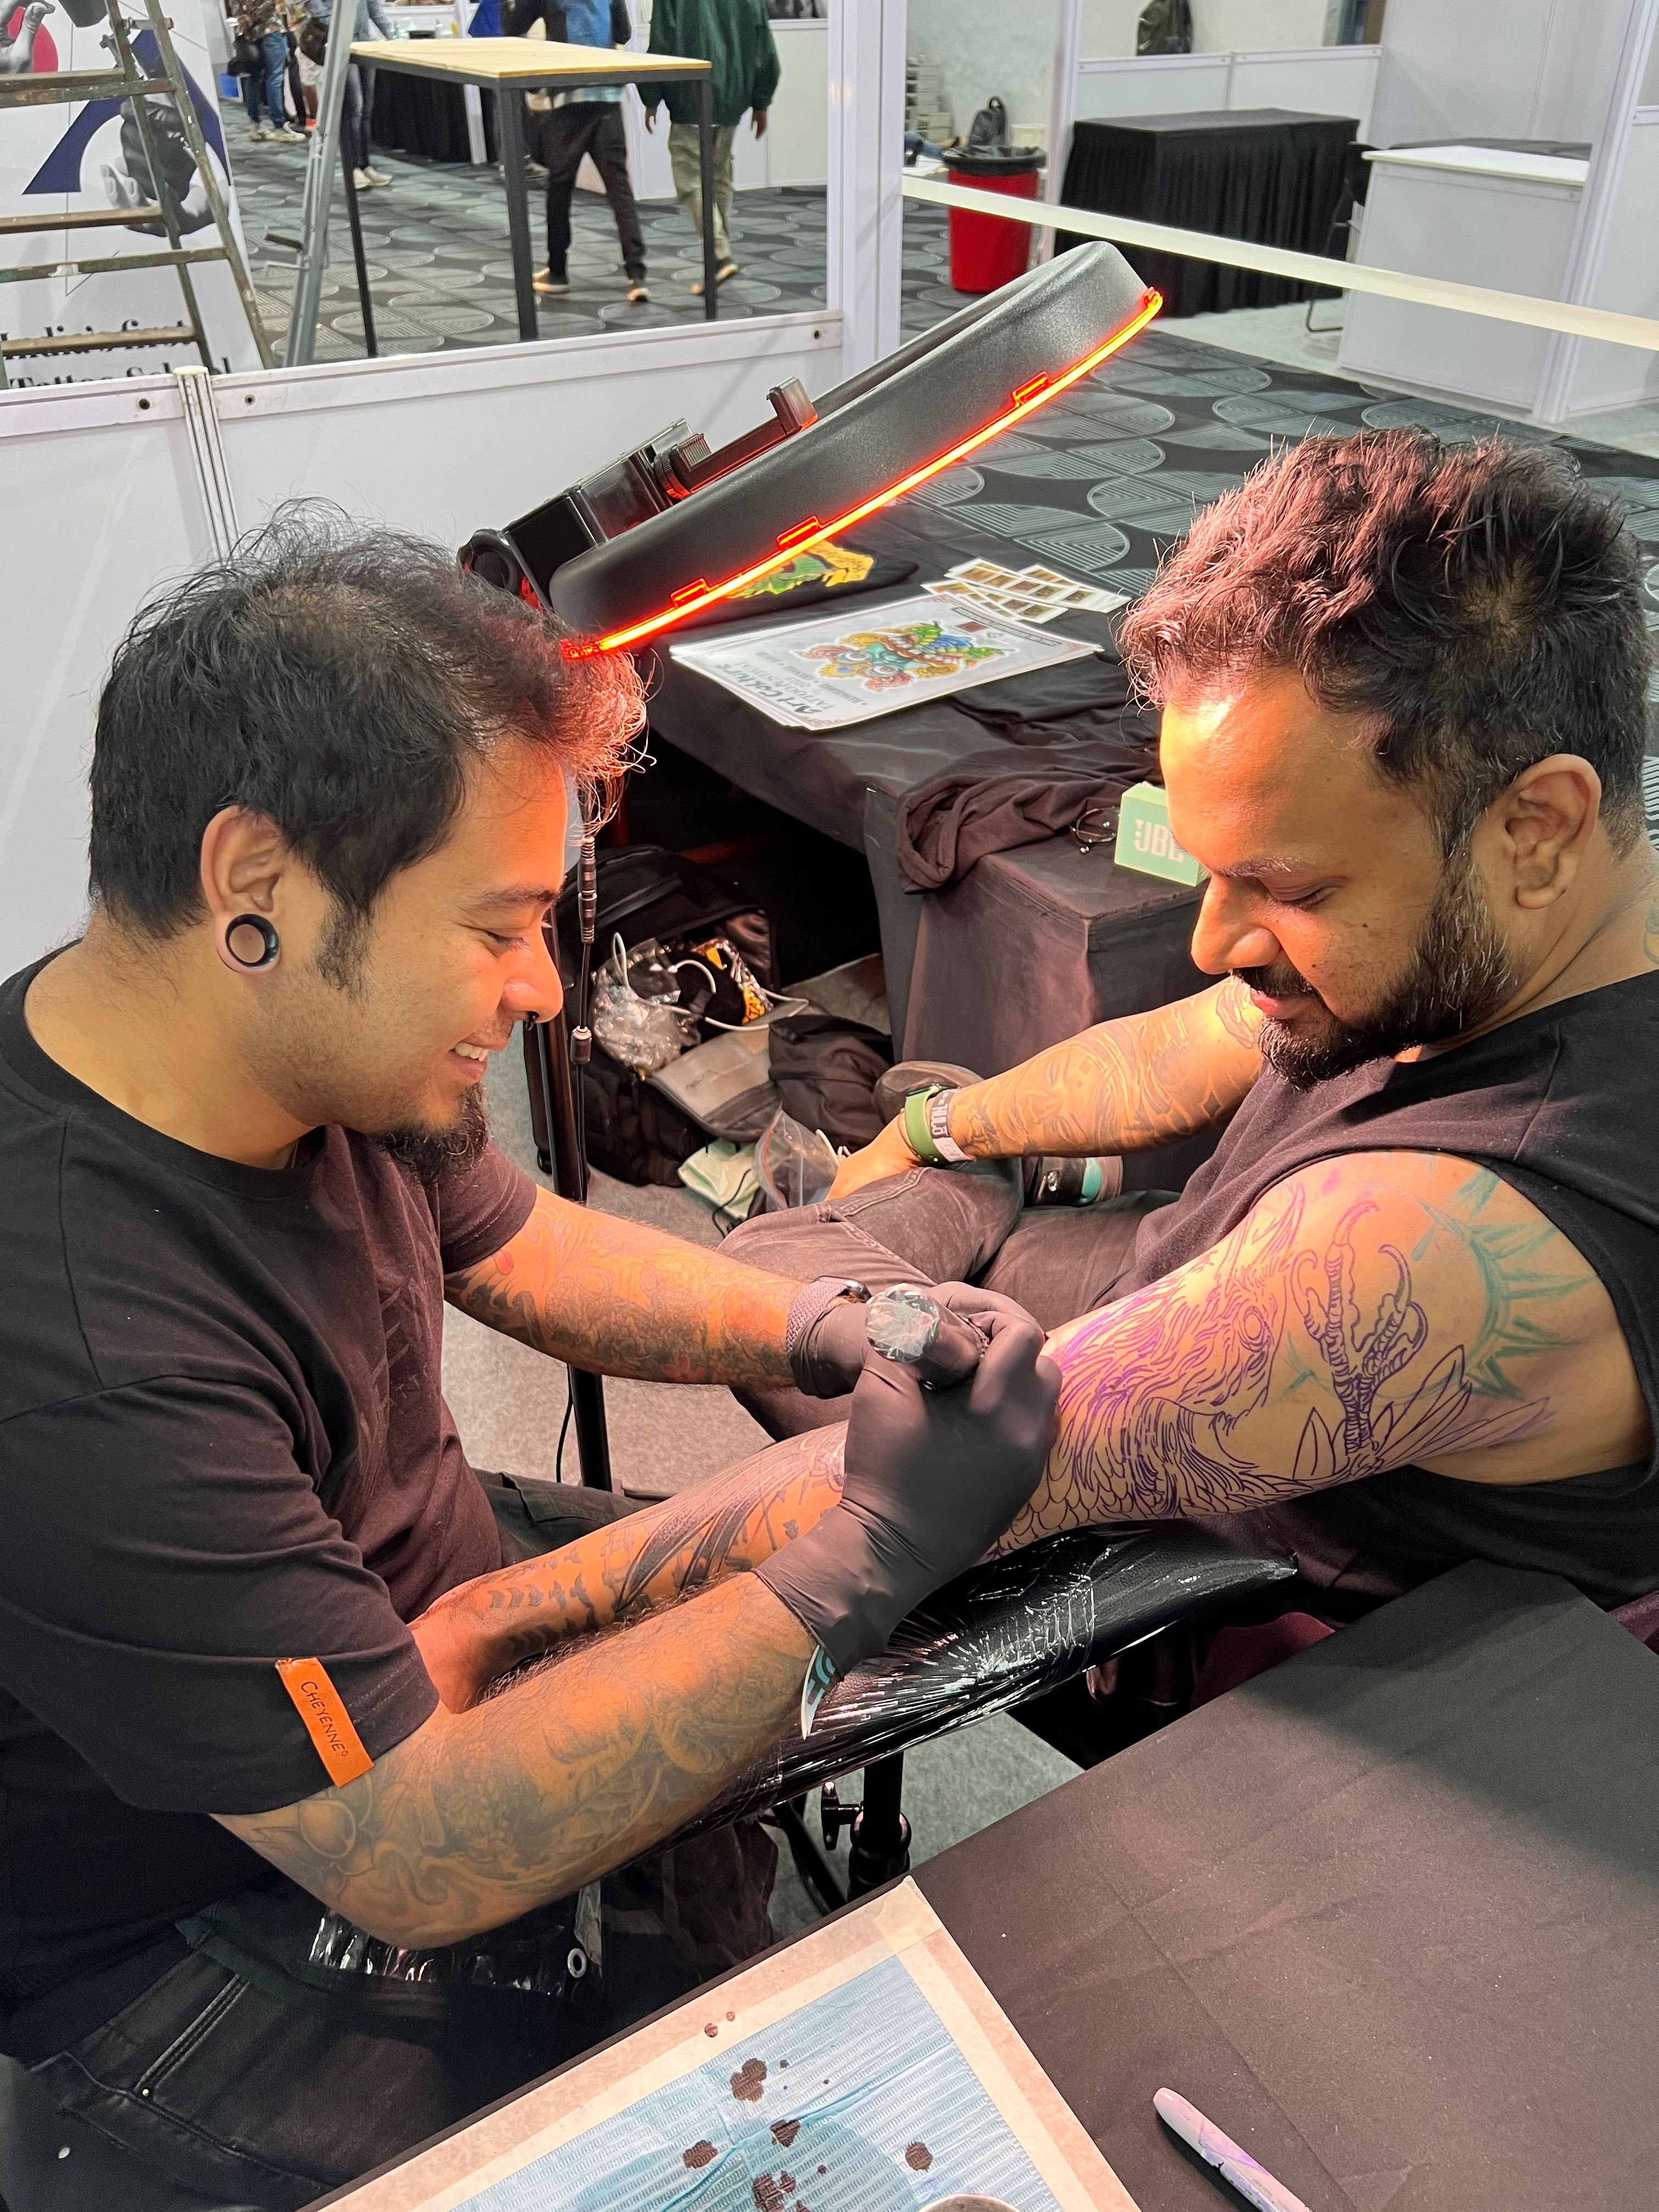 Chats & Tatts: Carving Out a Career As a Tattoo Artist ft. Patrick Sweeney